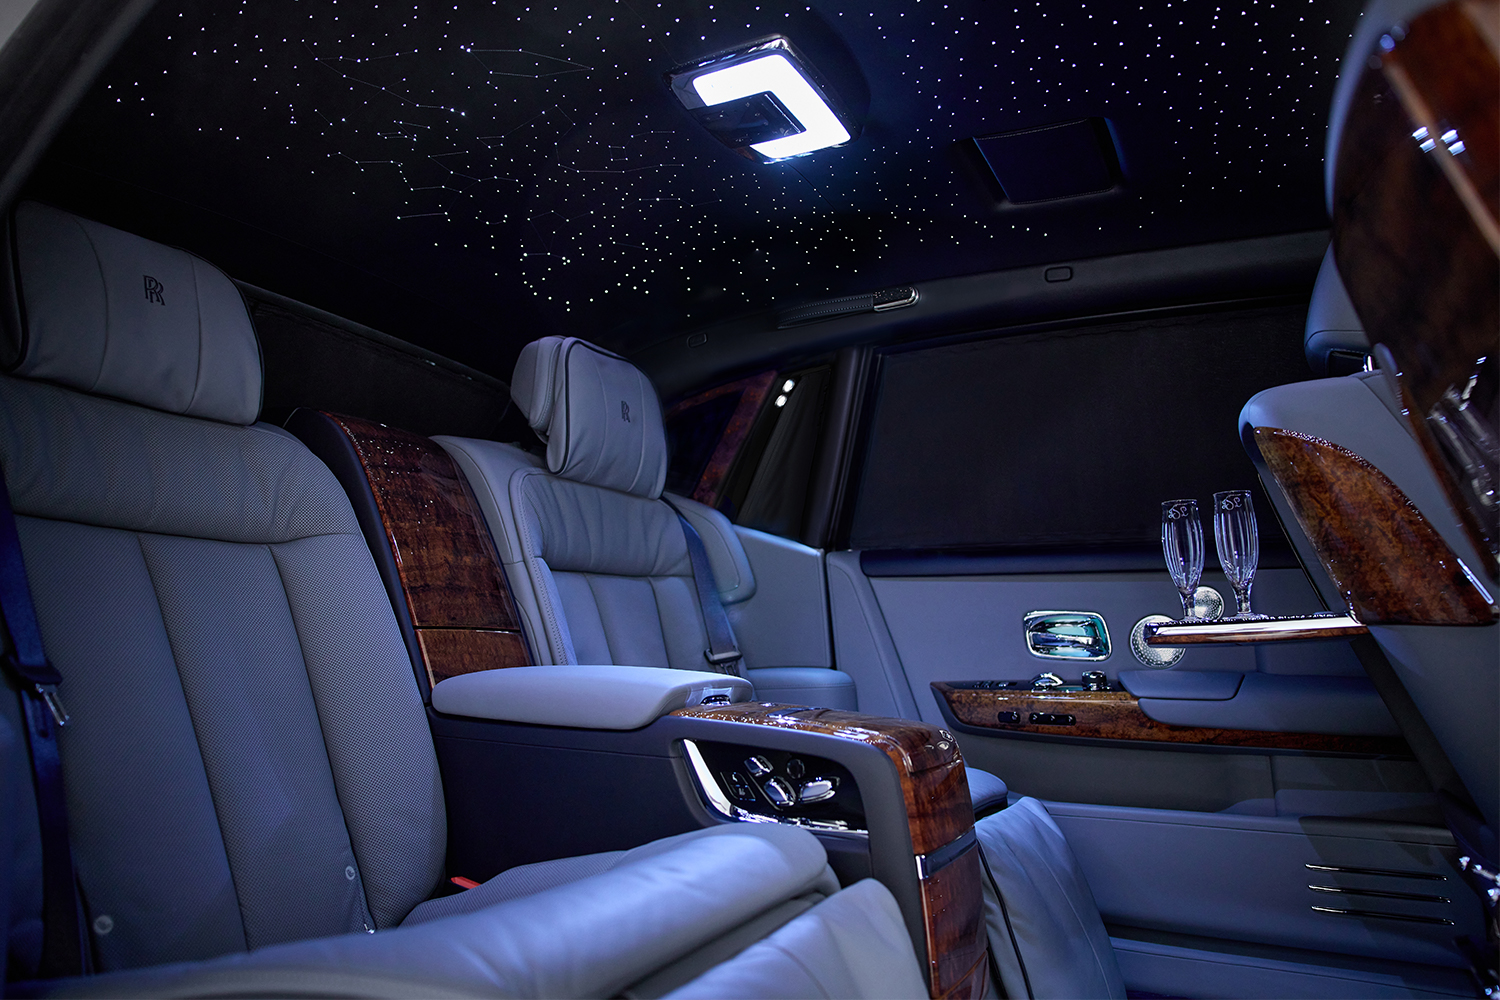 The interior of the Rolls-Royce Phantom Koa, a bespoke car that features koa wood and a Starlight Headliner featuring the night sky above Cleveland, Ohio.